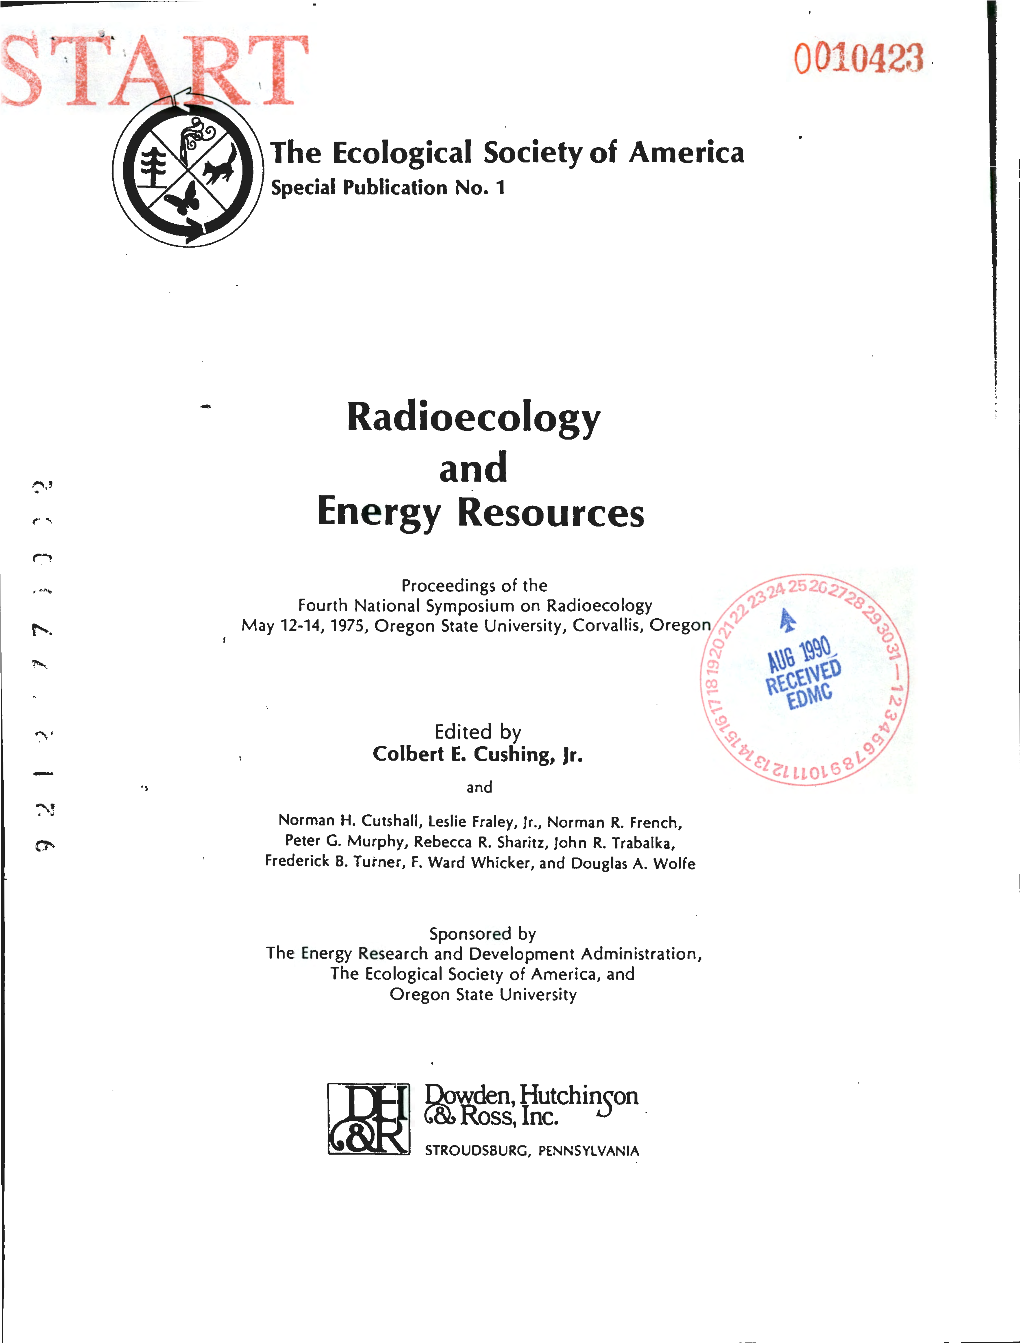 Radioecology and Energy Resources